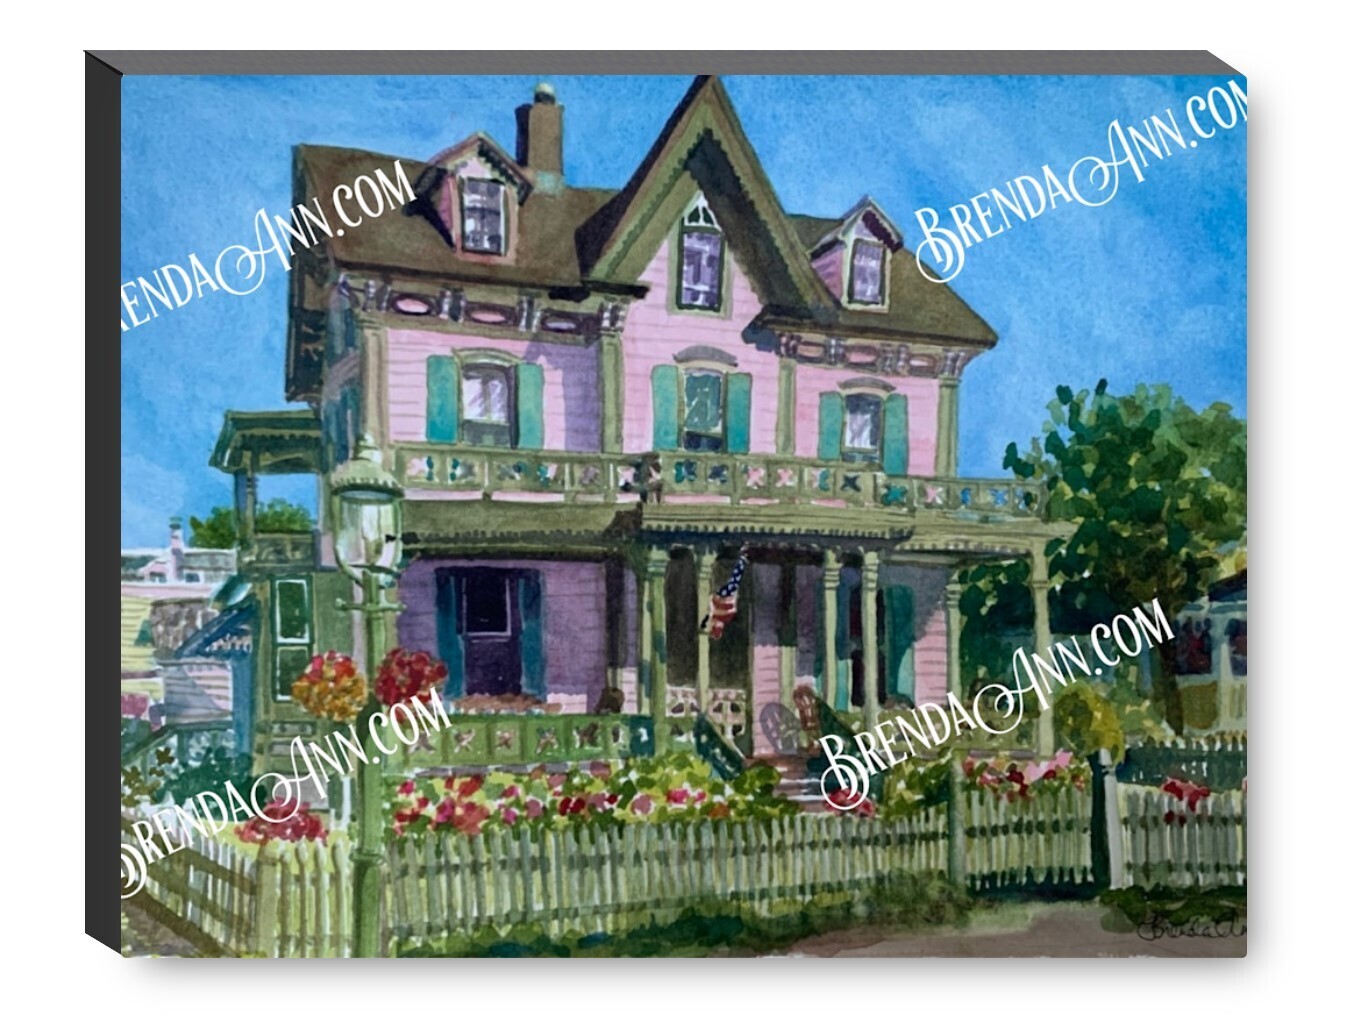 J. Spicer Leaming House in Cape May NJ Canvas Gallery Wrapped Print - Watercolor Art - Ready to hang on a wall